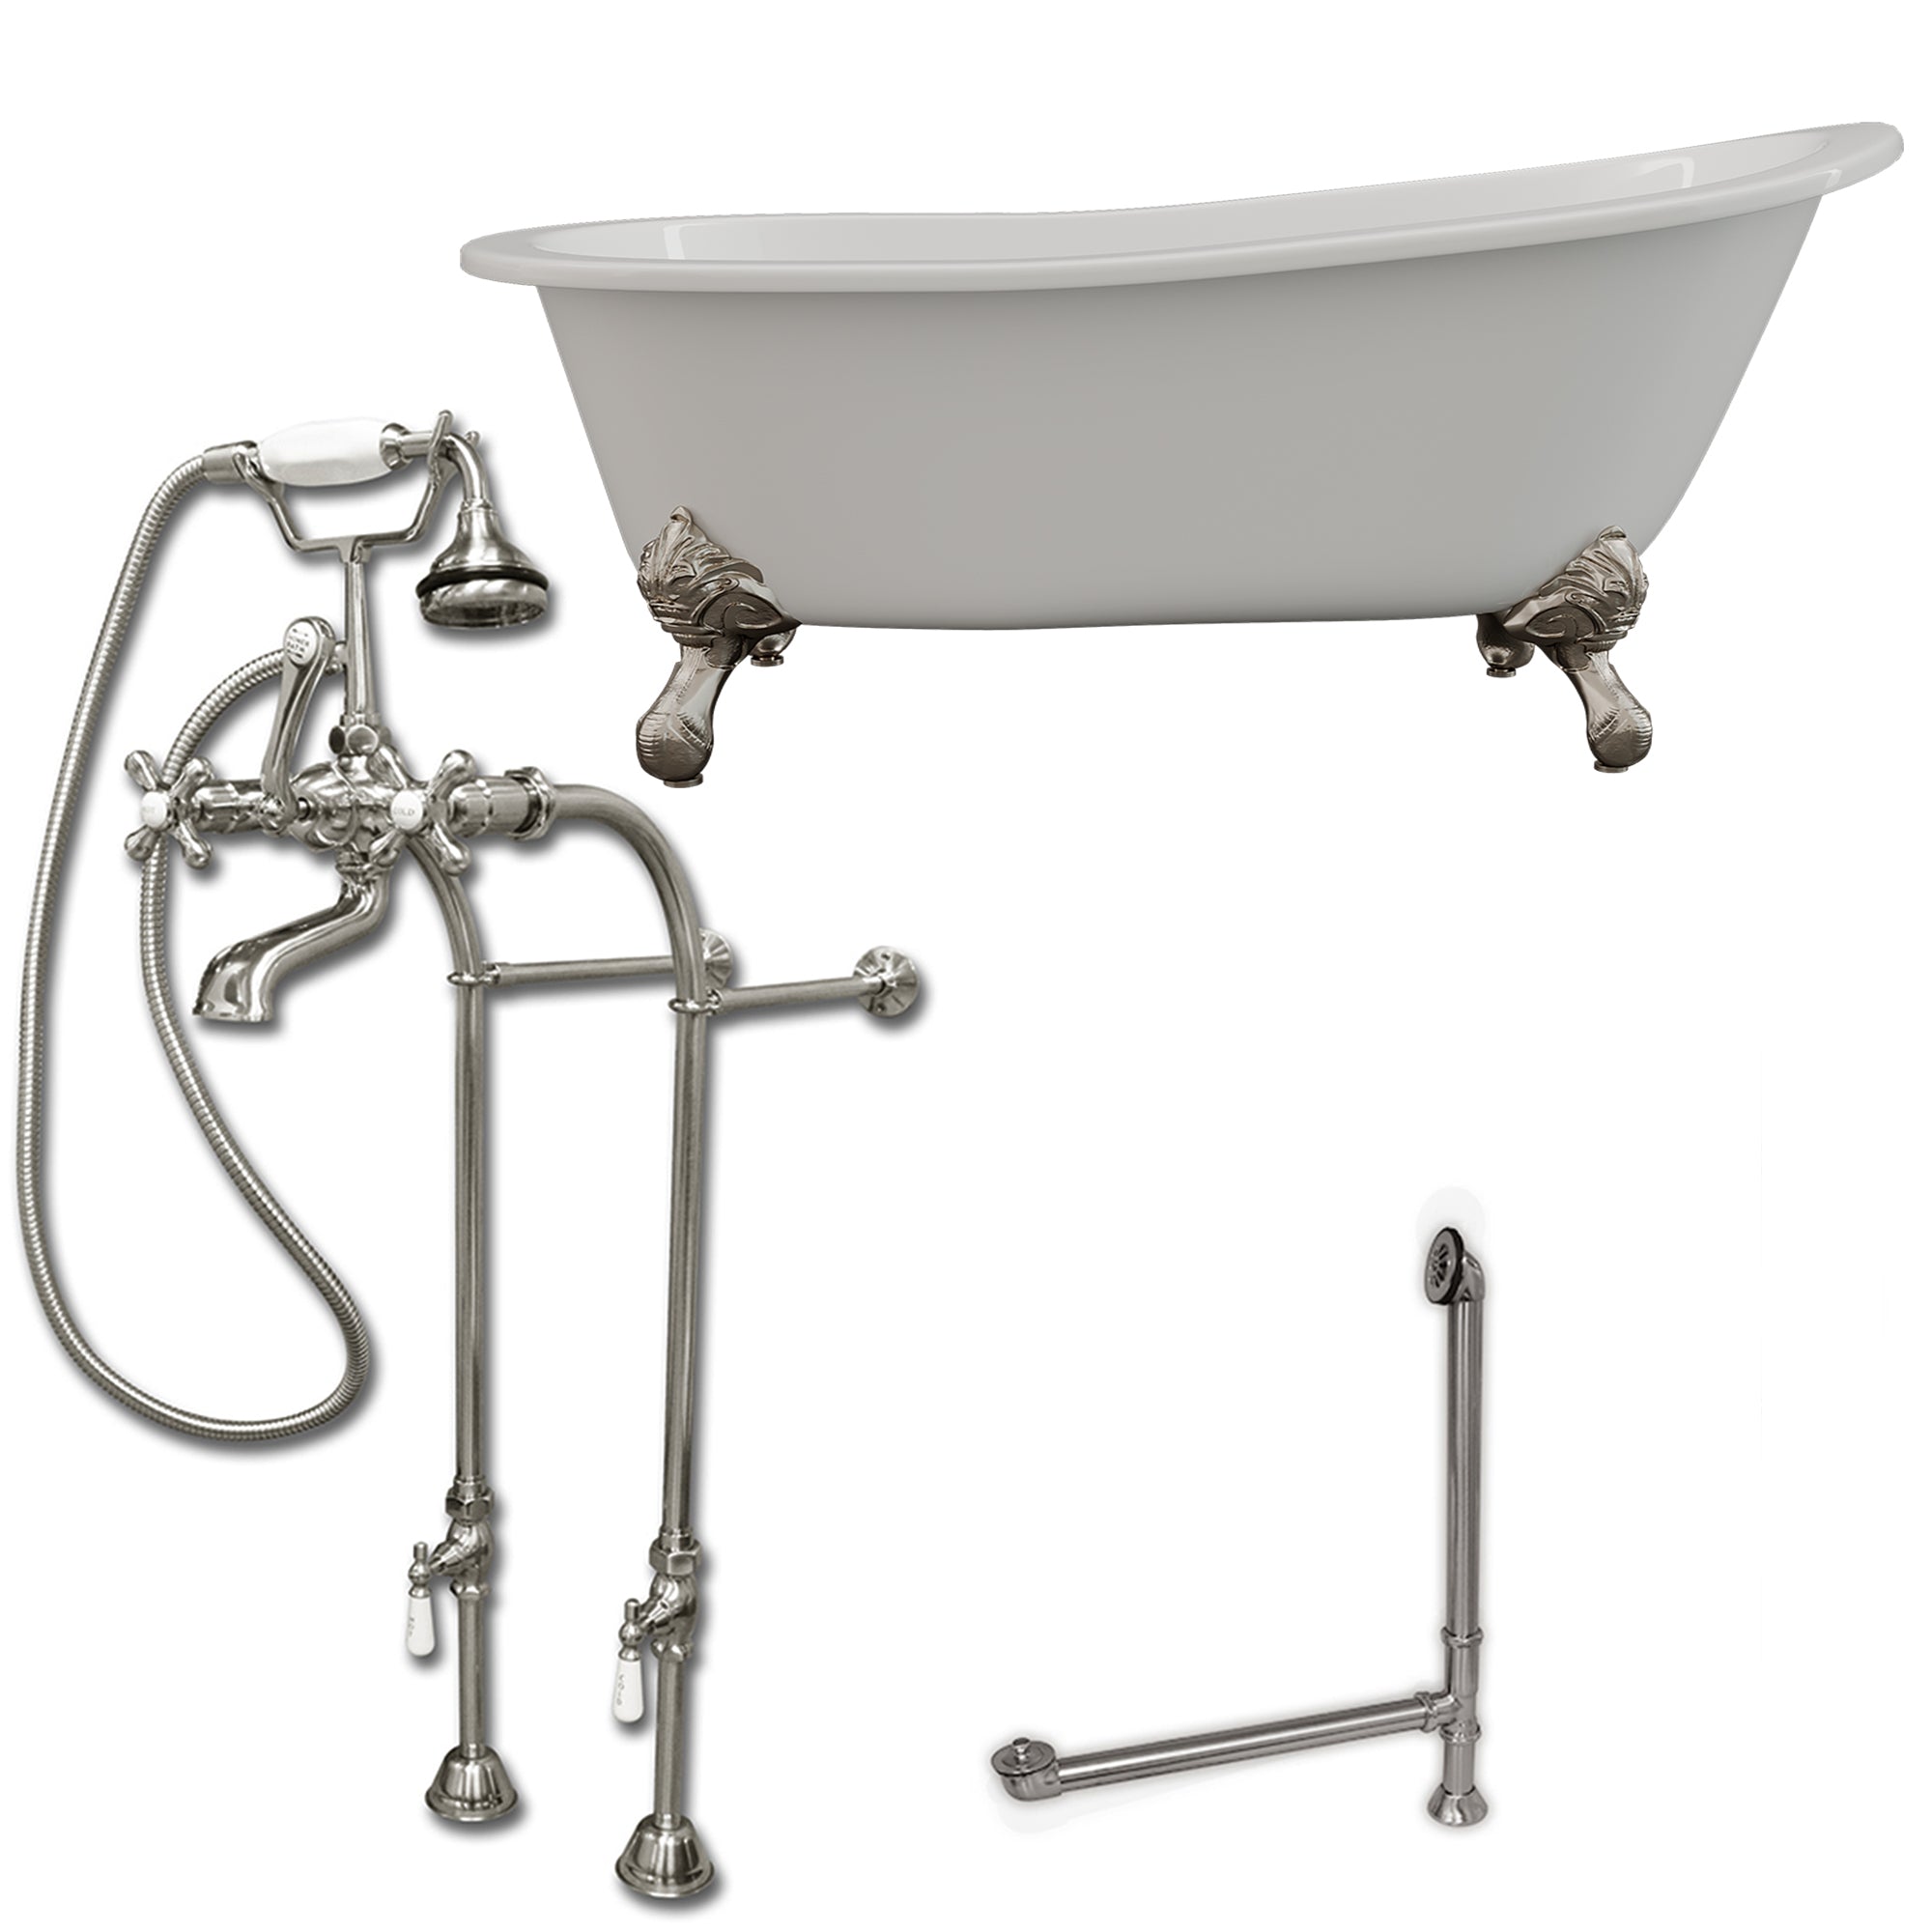 Cambridge Plumbing 67-Inch Slipper Cast Iron Clawfoot Tub (Porcelain enamel interior and white paint exterior) and Freestanding Plumbing Package (Brushed nickel) ST67-398463-PKG-NH - Vital Hydrotherapy